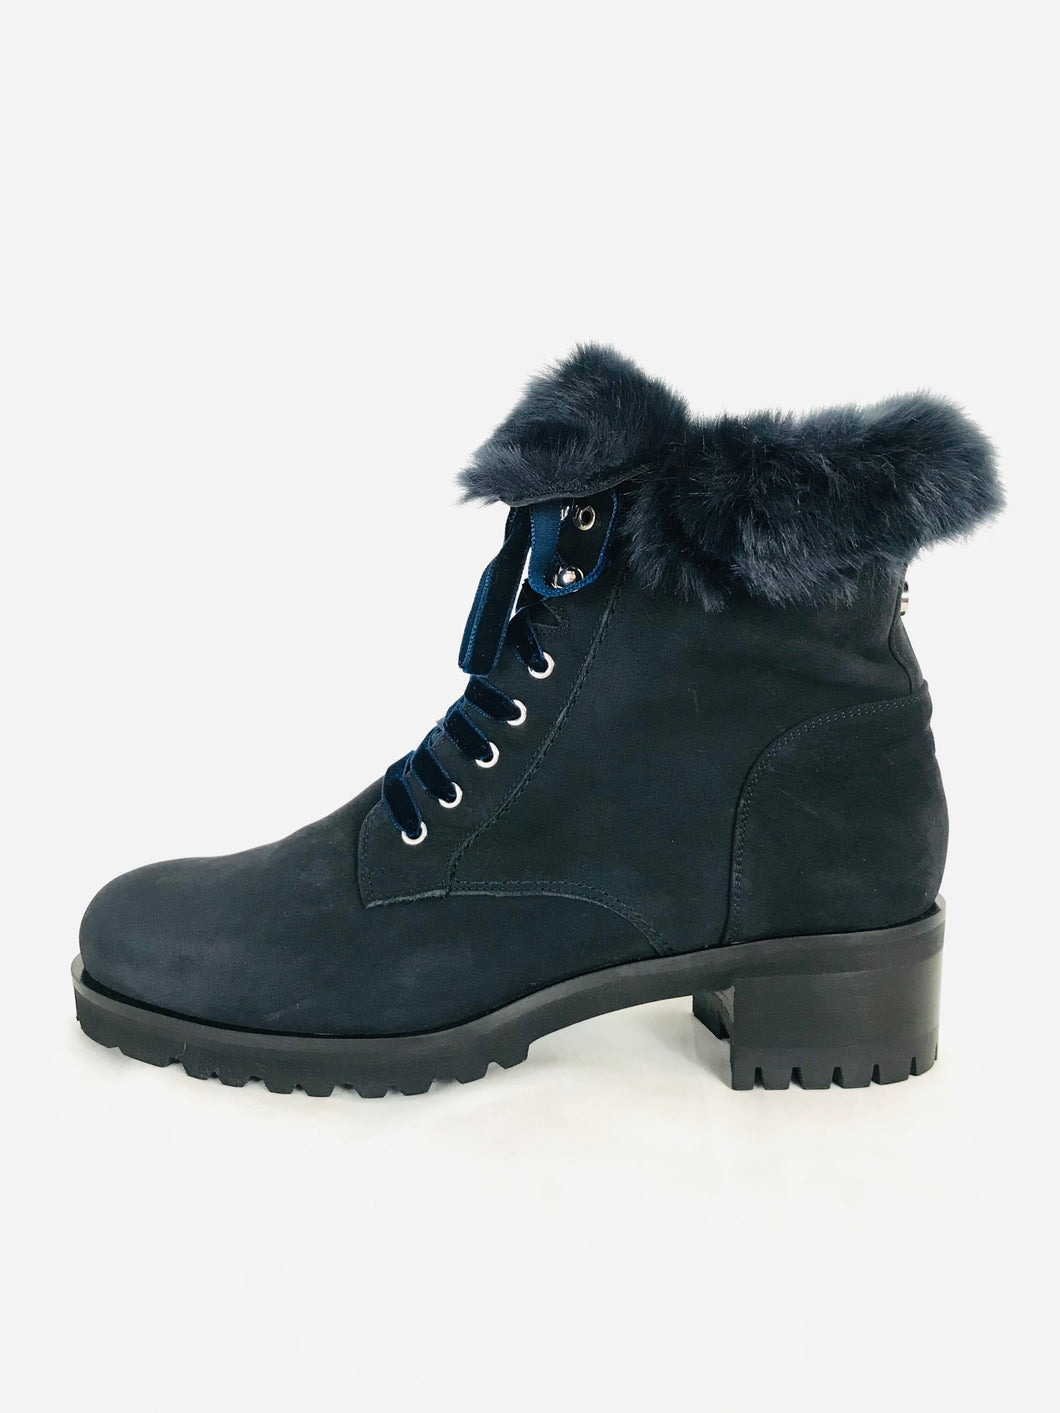 Russell & Bromley Women’s Leather Fur Combat Boots | 39.5 UK6.5 | Navy Blue